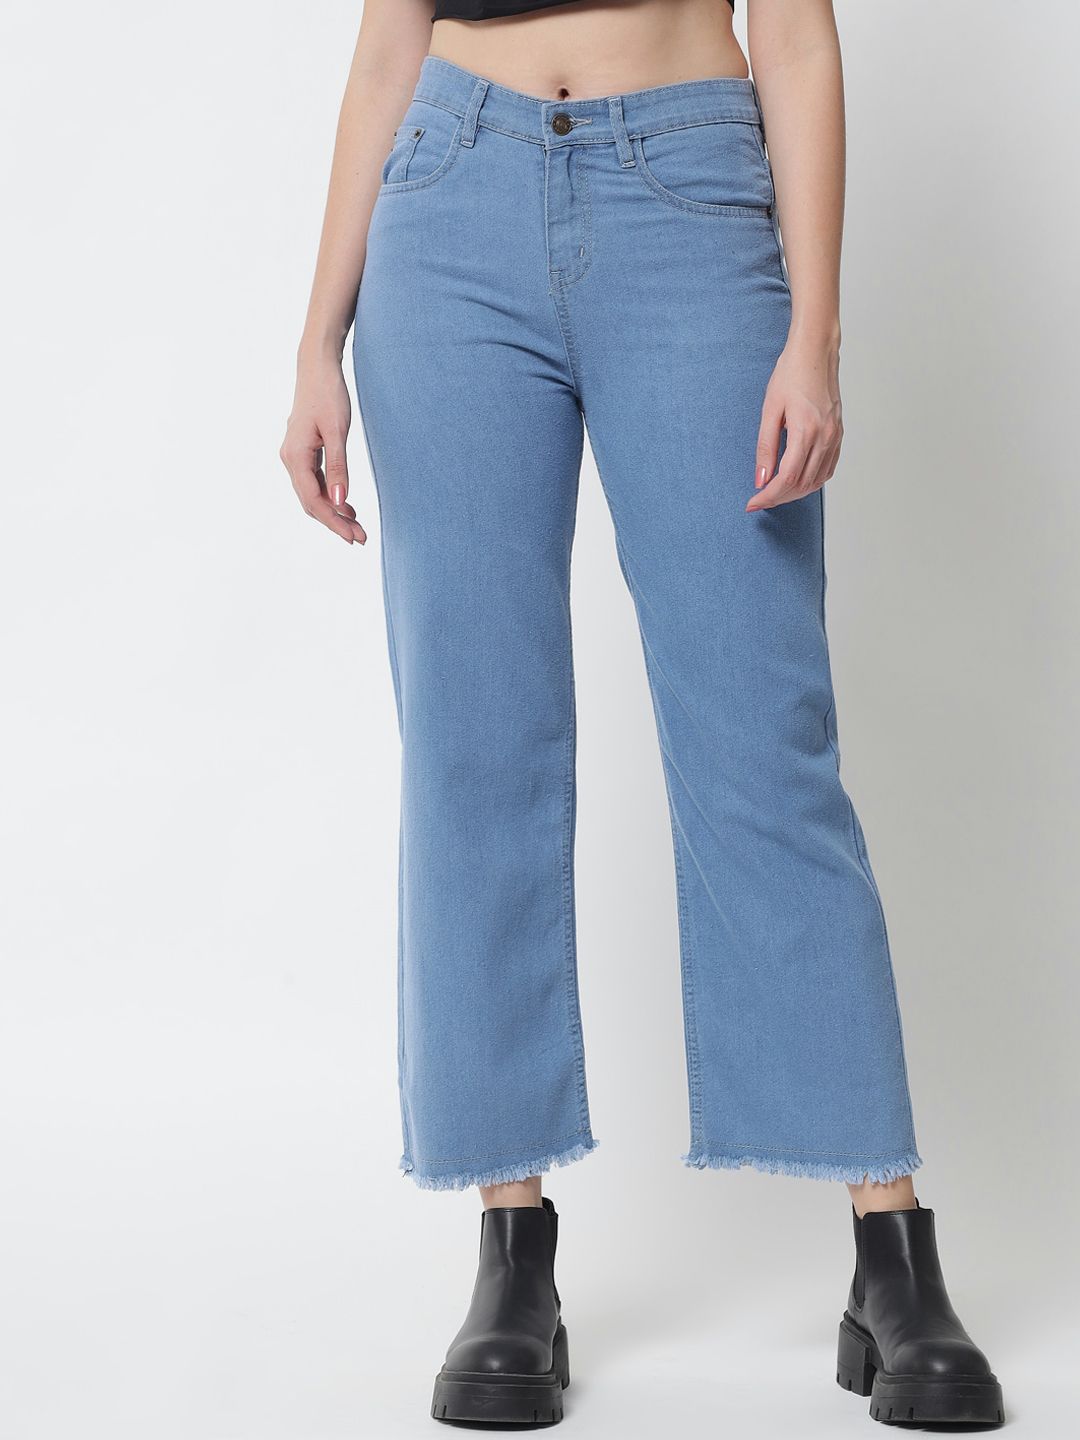 Q-rious Women Blue Flared High-Rise Stretchable Jeans Price in India